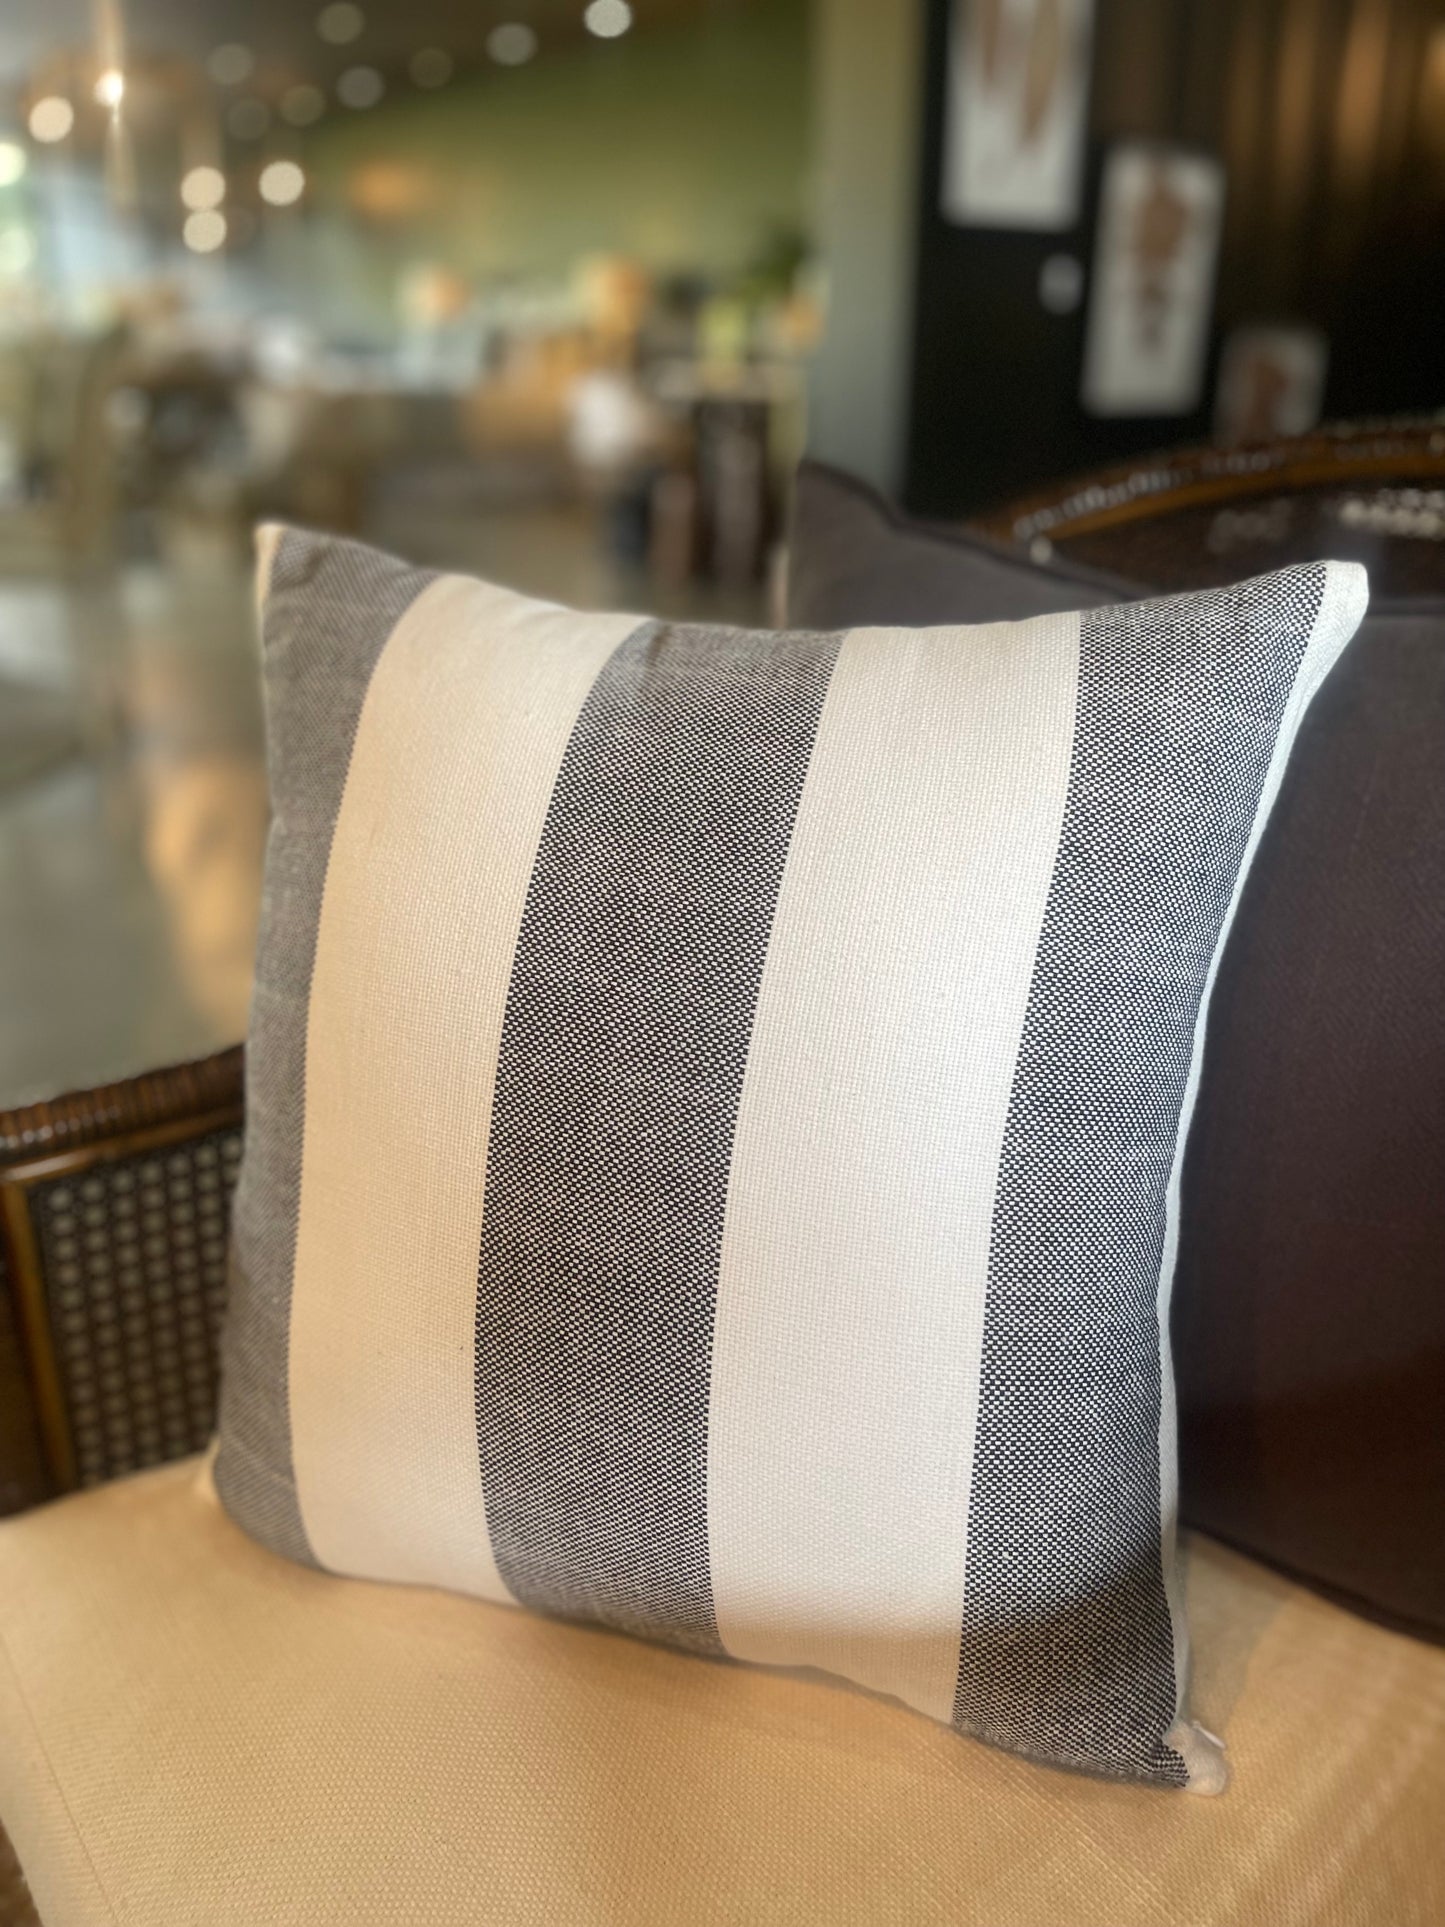 Our Lyon Handwoven Cotton Cushion boasts sleek stripes and provides versatile styling, ideal for complementing sofas and beds. Its luxurious Dacron insert adds additional comfort. Black and white coloured.